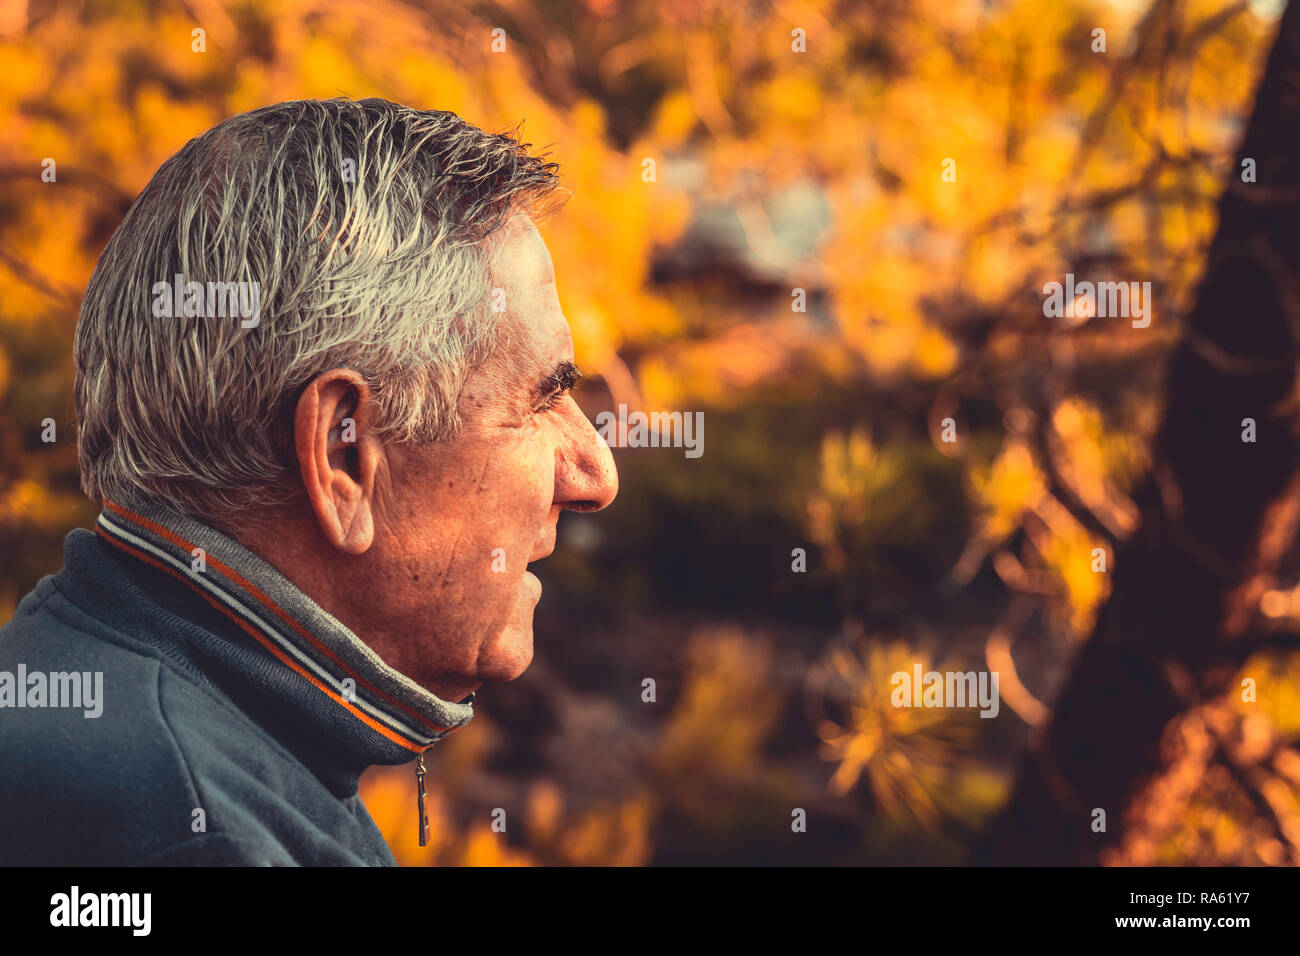 Senior man with gray hair in foreground on autumnal background Stock Photo